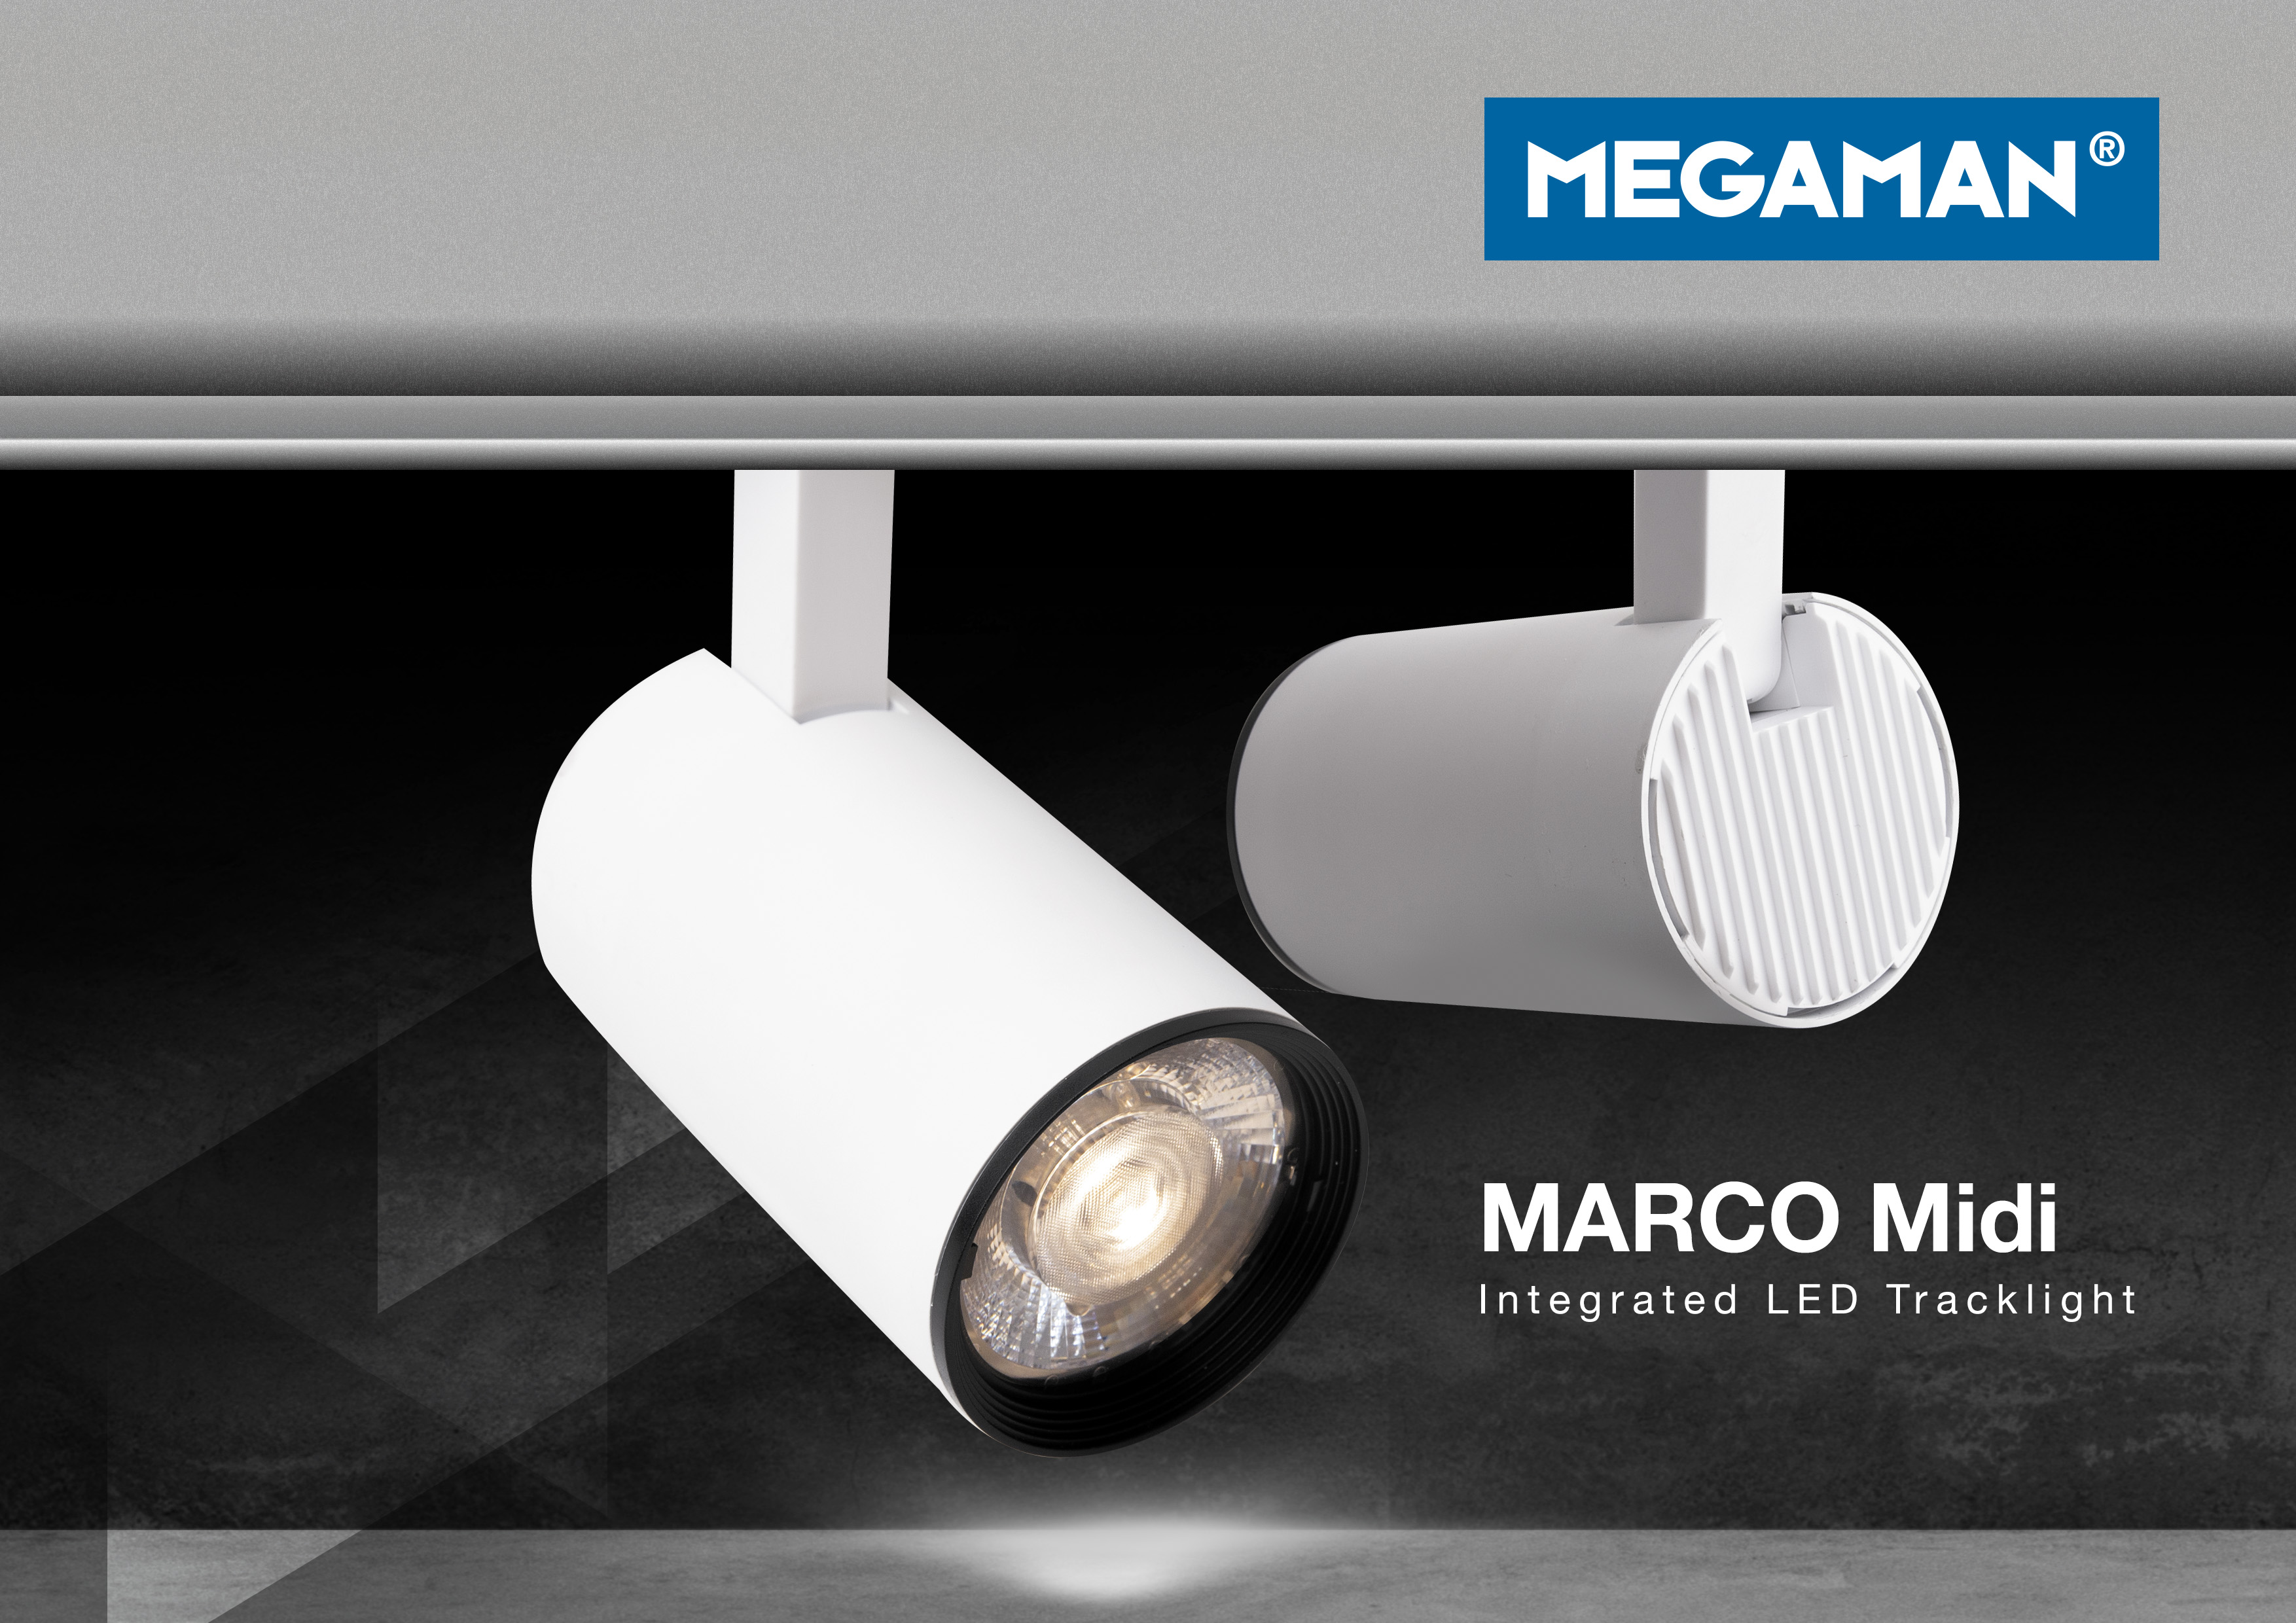 MEGAMAN | Top News | MEGAMAN® Adds Mid-range Model to MARCO Integrated LED Track Light Series with Dual Beam